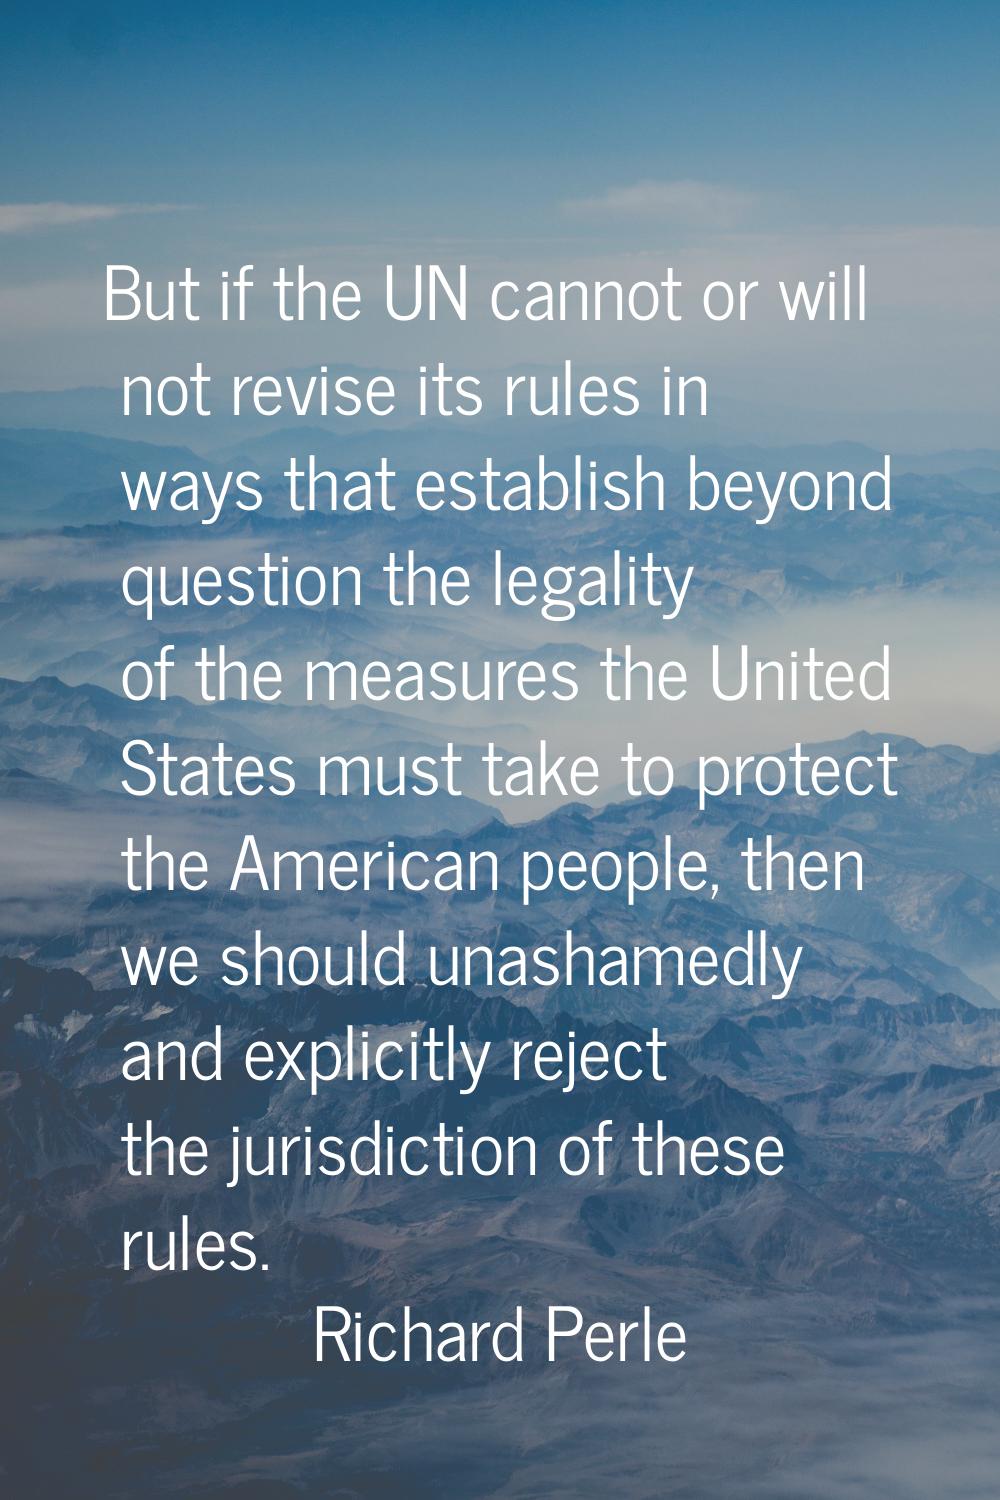 But if the UN cannot or will not revise its rules in ways that establish beyond question the legali